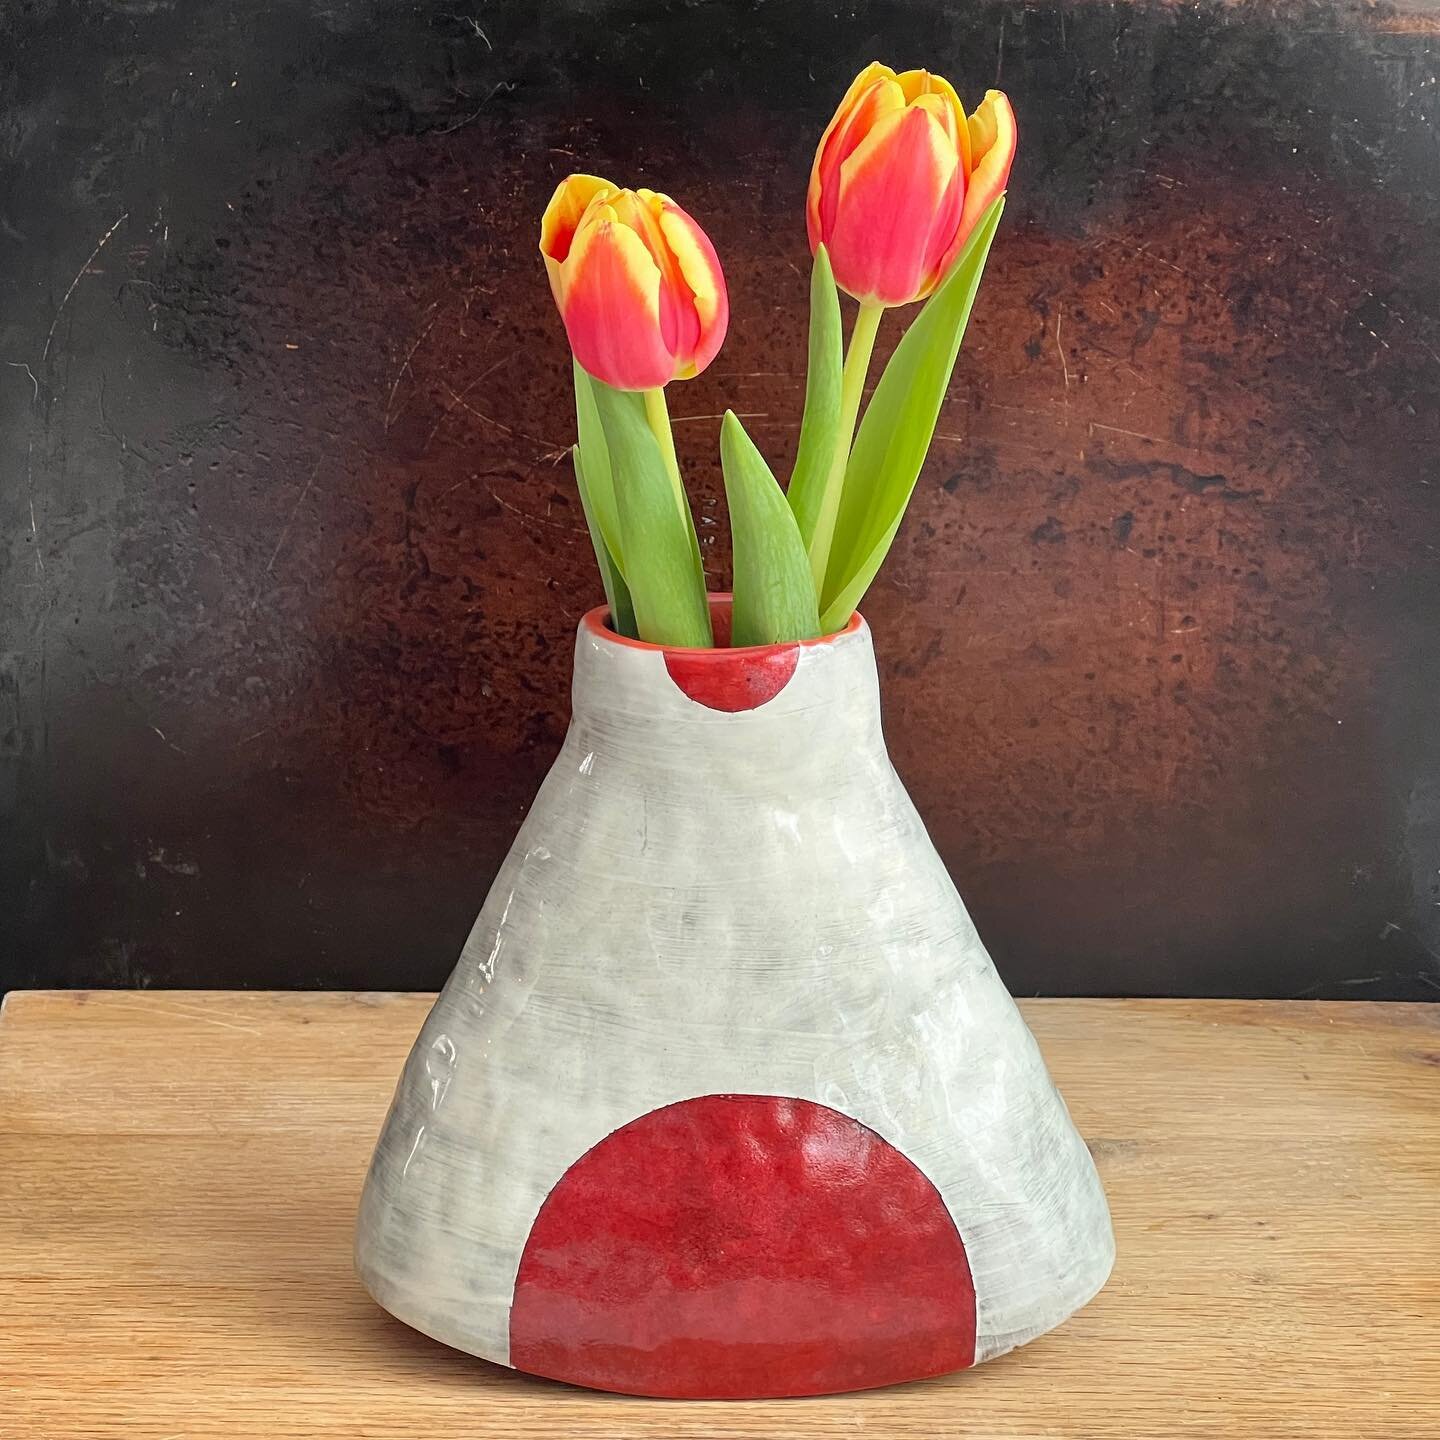 This ray of sunshine is now available on the website. Along with some friends. 🌱
.
.
.
#ceramics #handbuiltceramics #coloredslip #graphicclay #functionalceramics #pinchedpottery #spring #handmadevase #contemporaryceramics